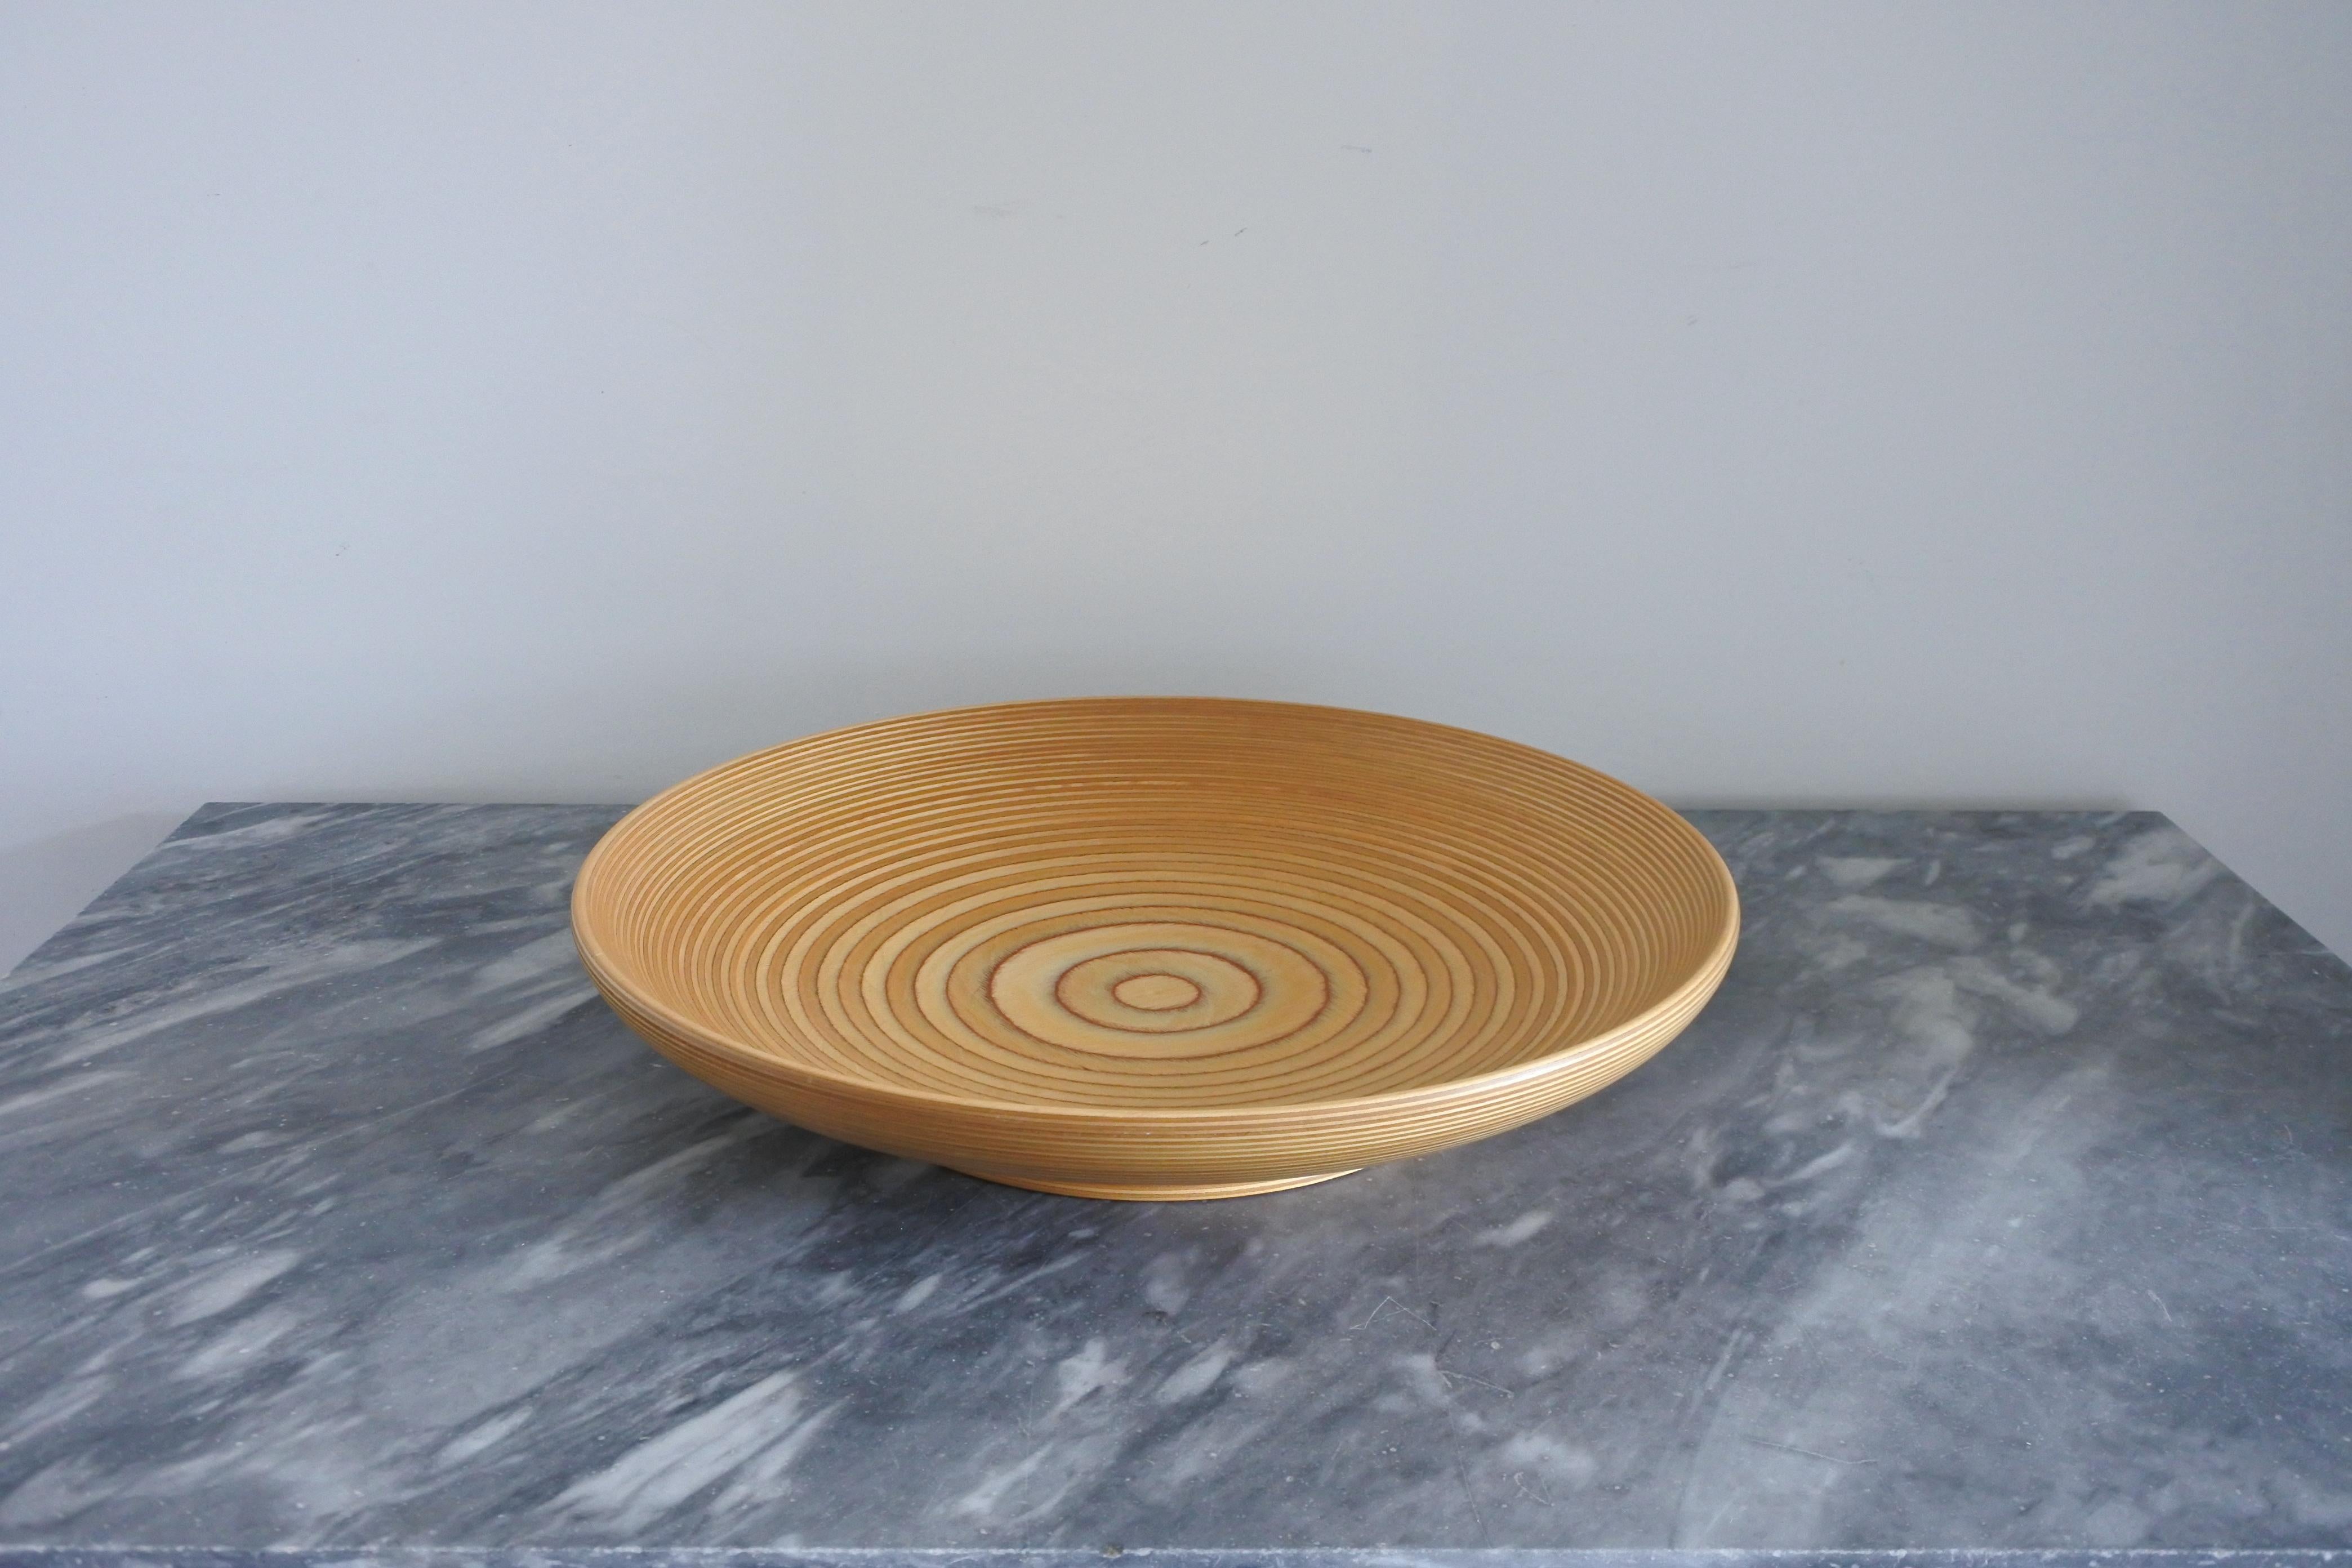 XL birch plywood tray or platter by Saarinen & Schauman Wisa
Made in Finland, second half of the 20th century

Marked accordingly.